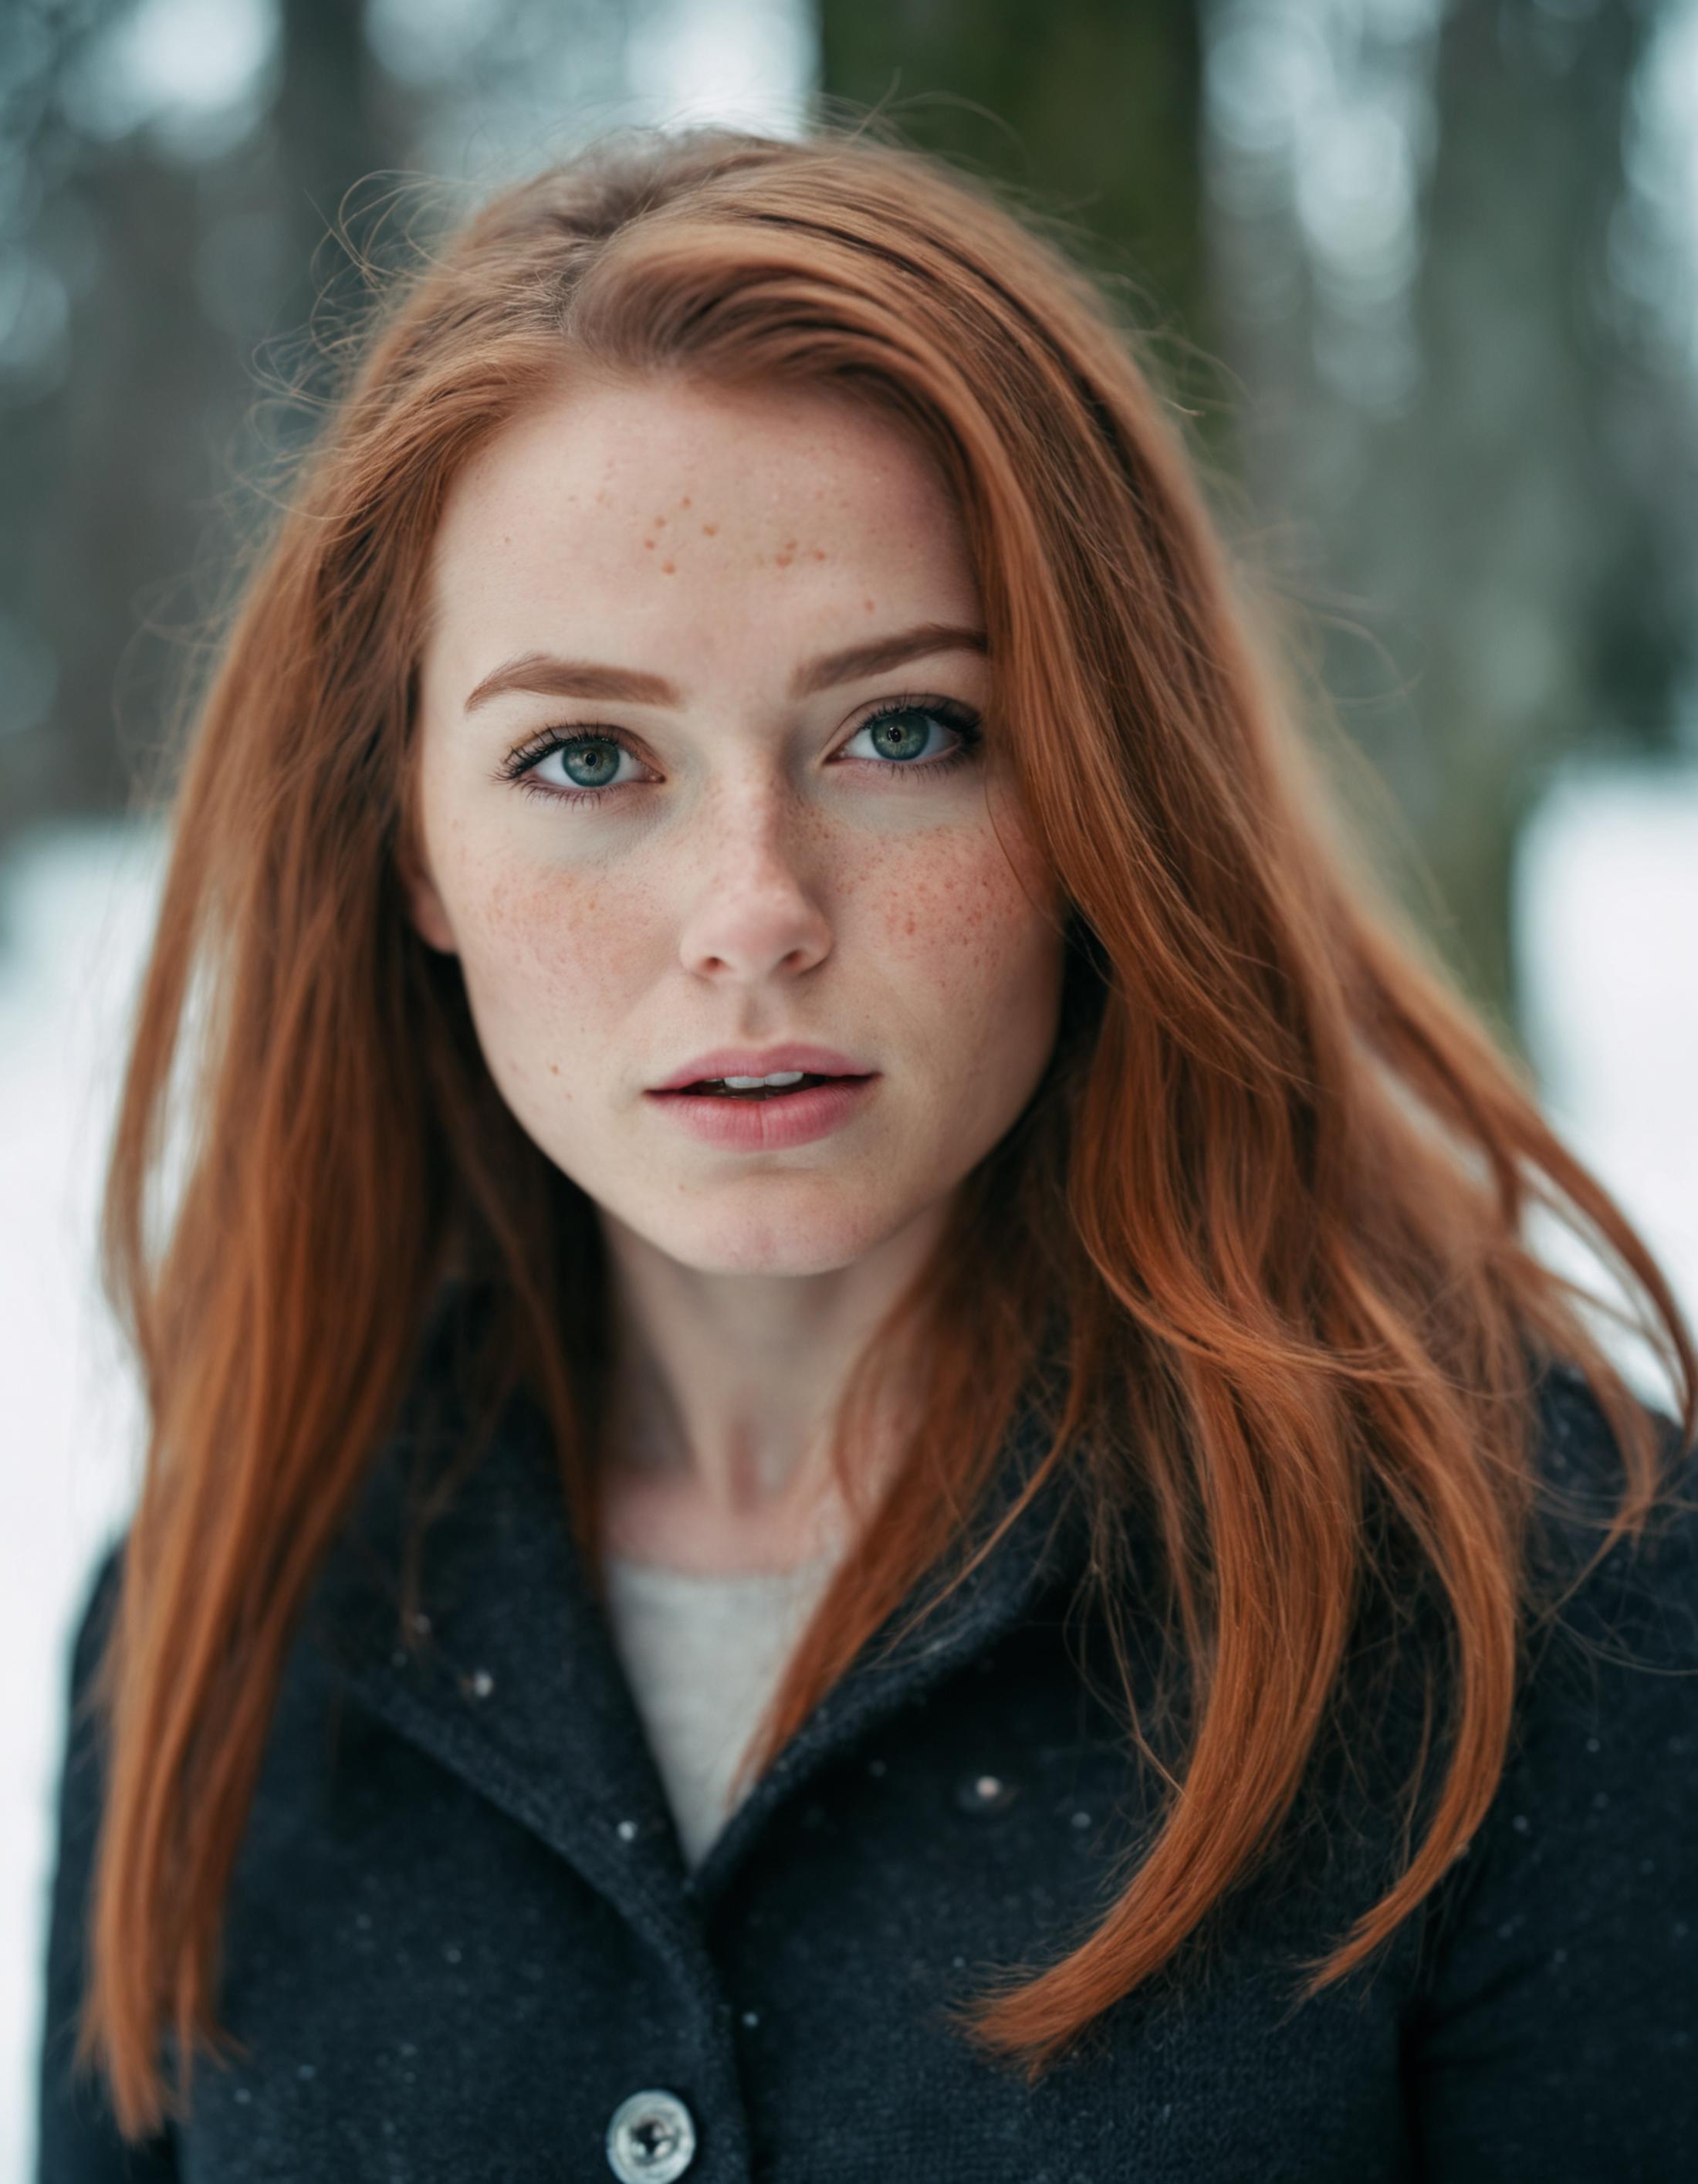 A close-up of a beautiful red-haired woman with freckles, wearing a black coat and looking into the camera.